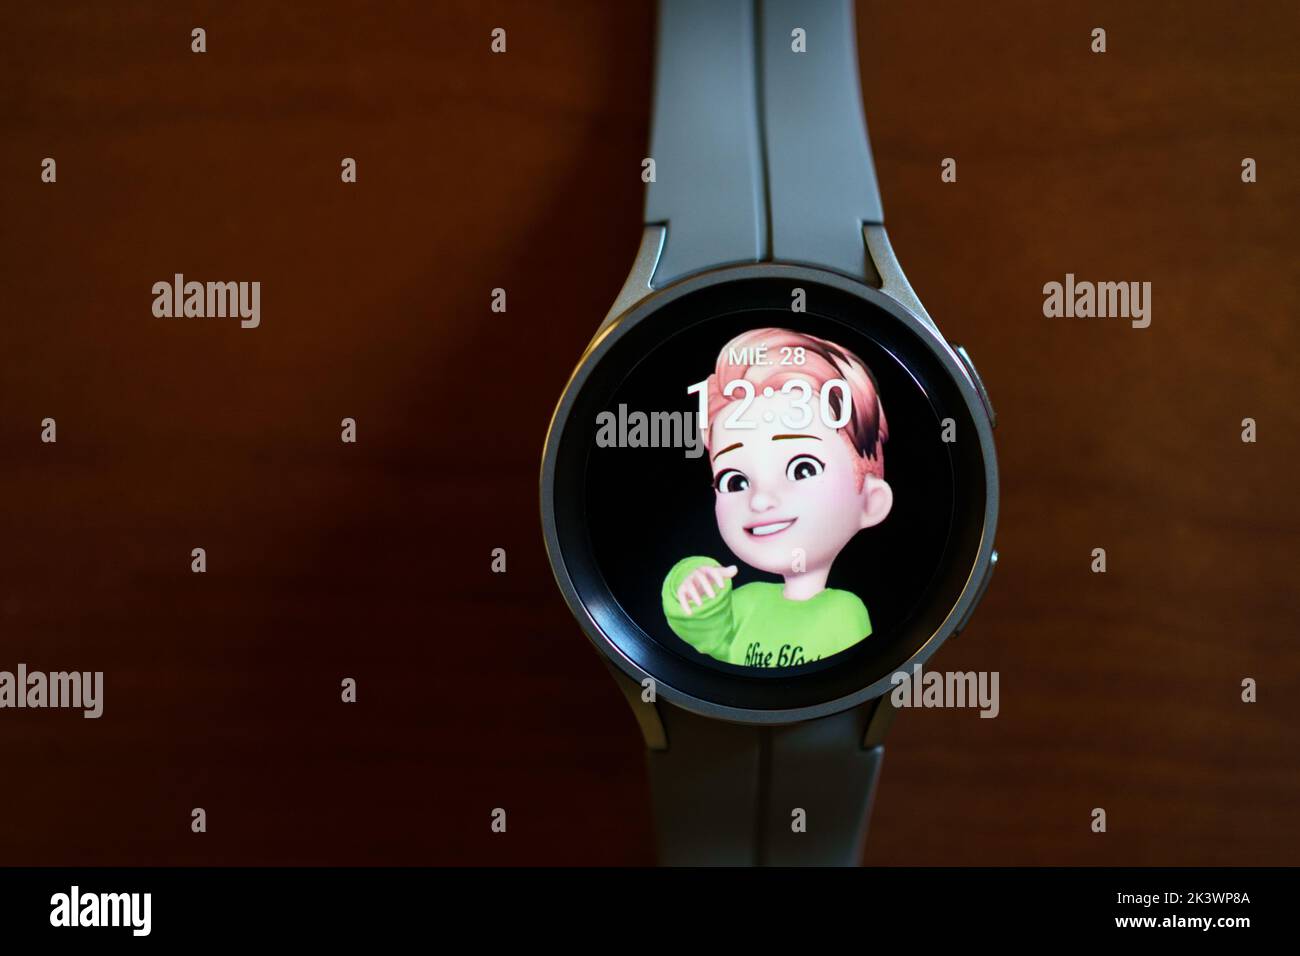 Granada, Andalusia, Spain - September 28, 2022: New Samsung Watch 5 Pro with watch face of AR Emoji Stock Photo